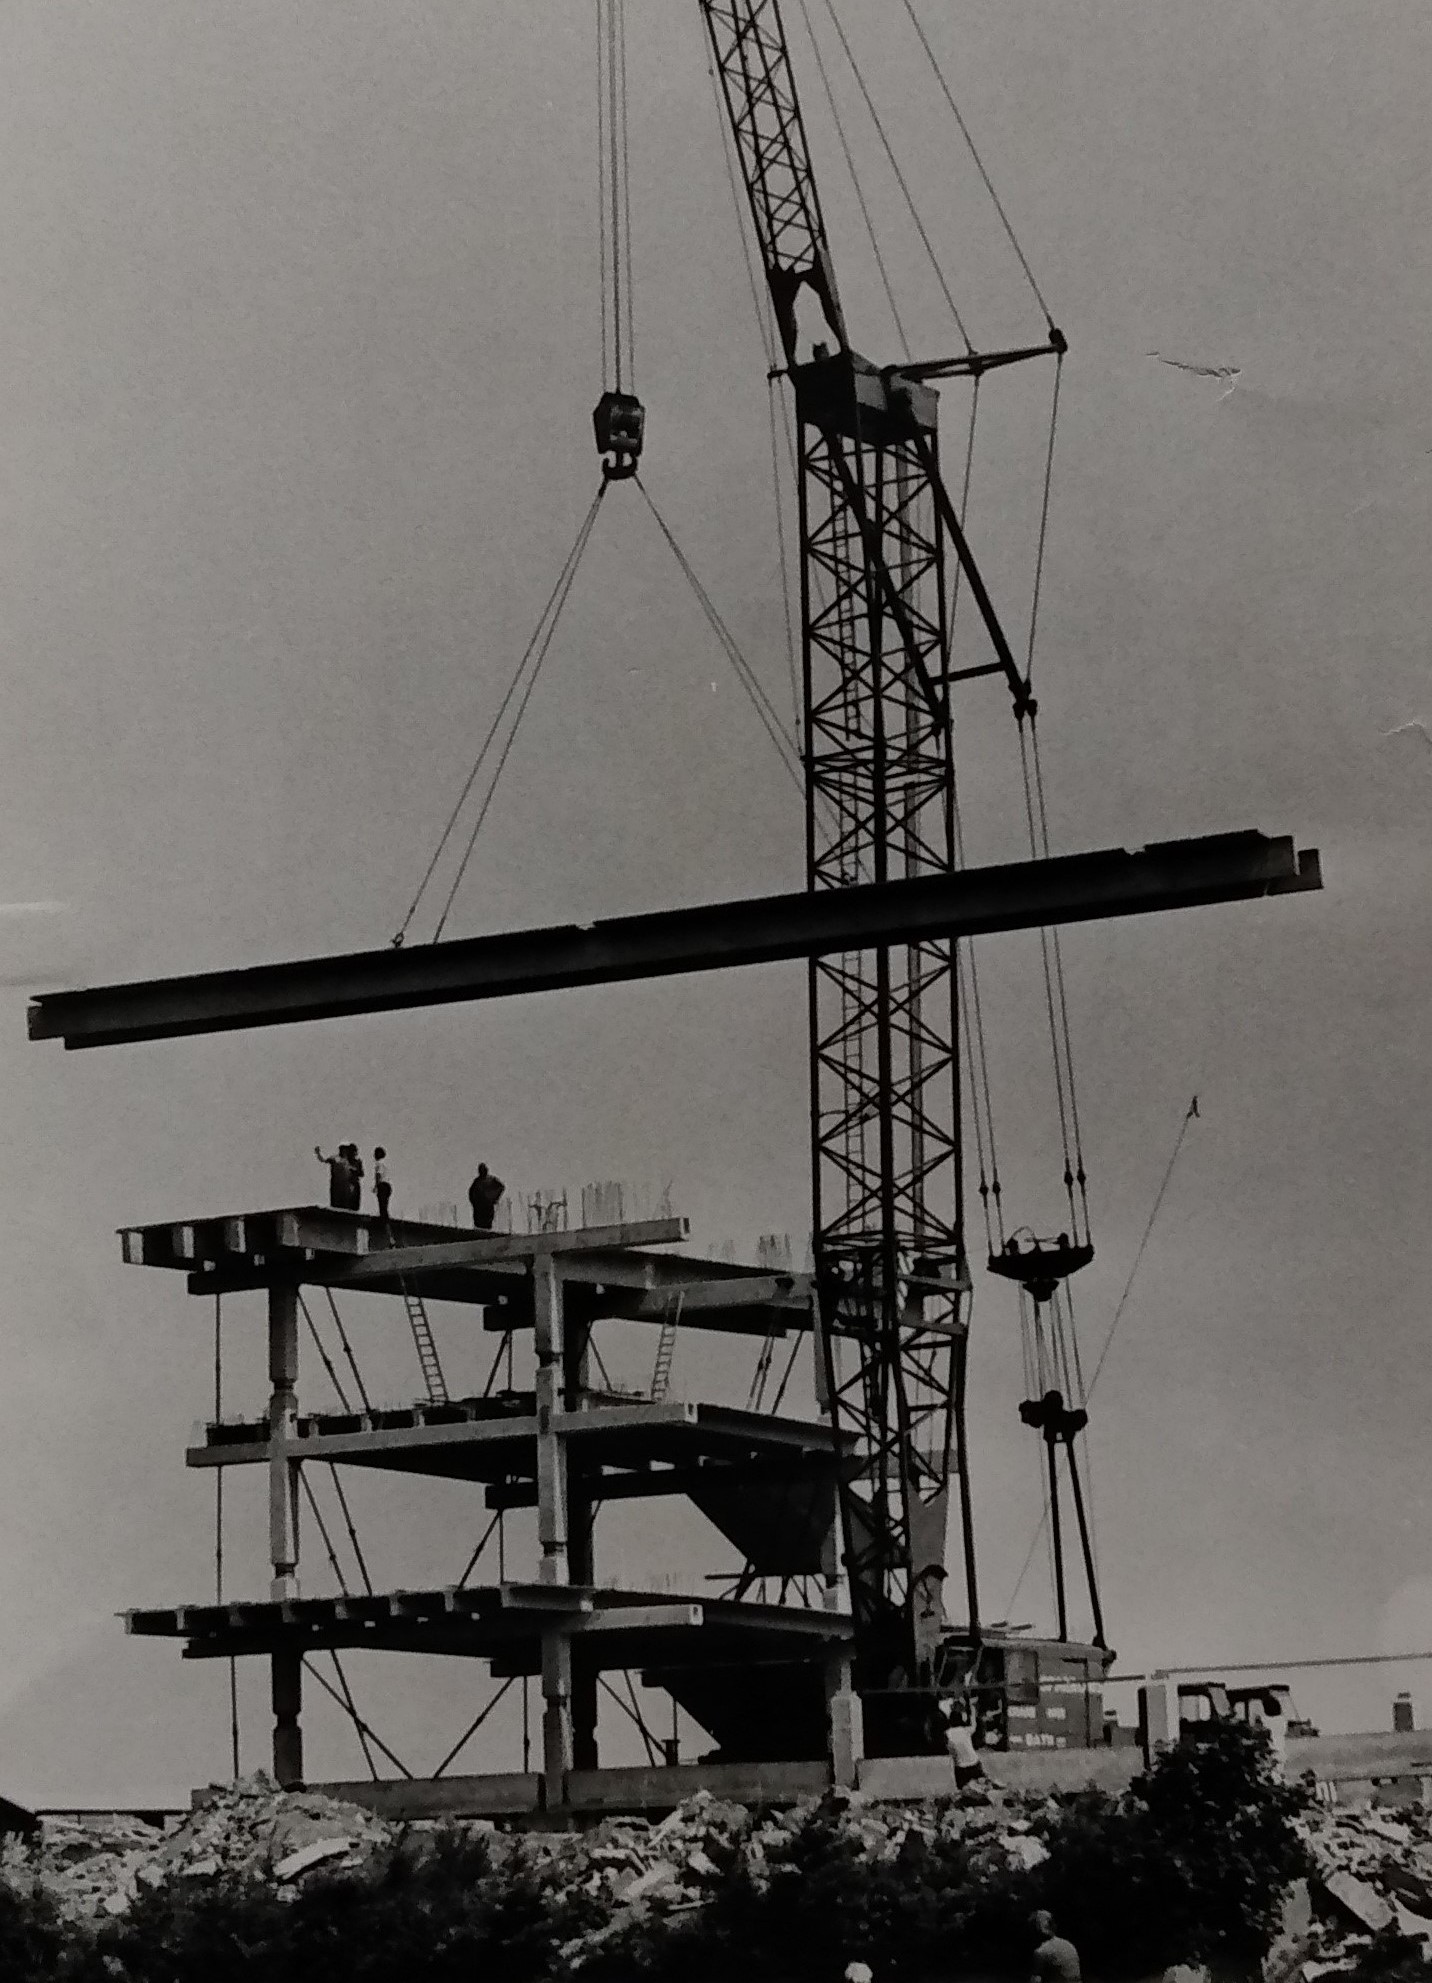 A jumbo-sized crane being used to swing girders into place during construction of the grandstand in June 1974